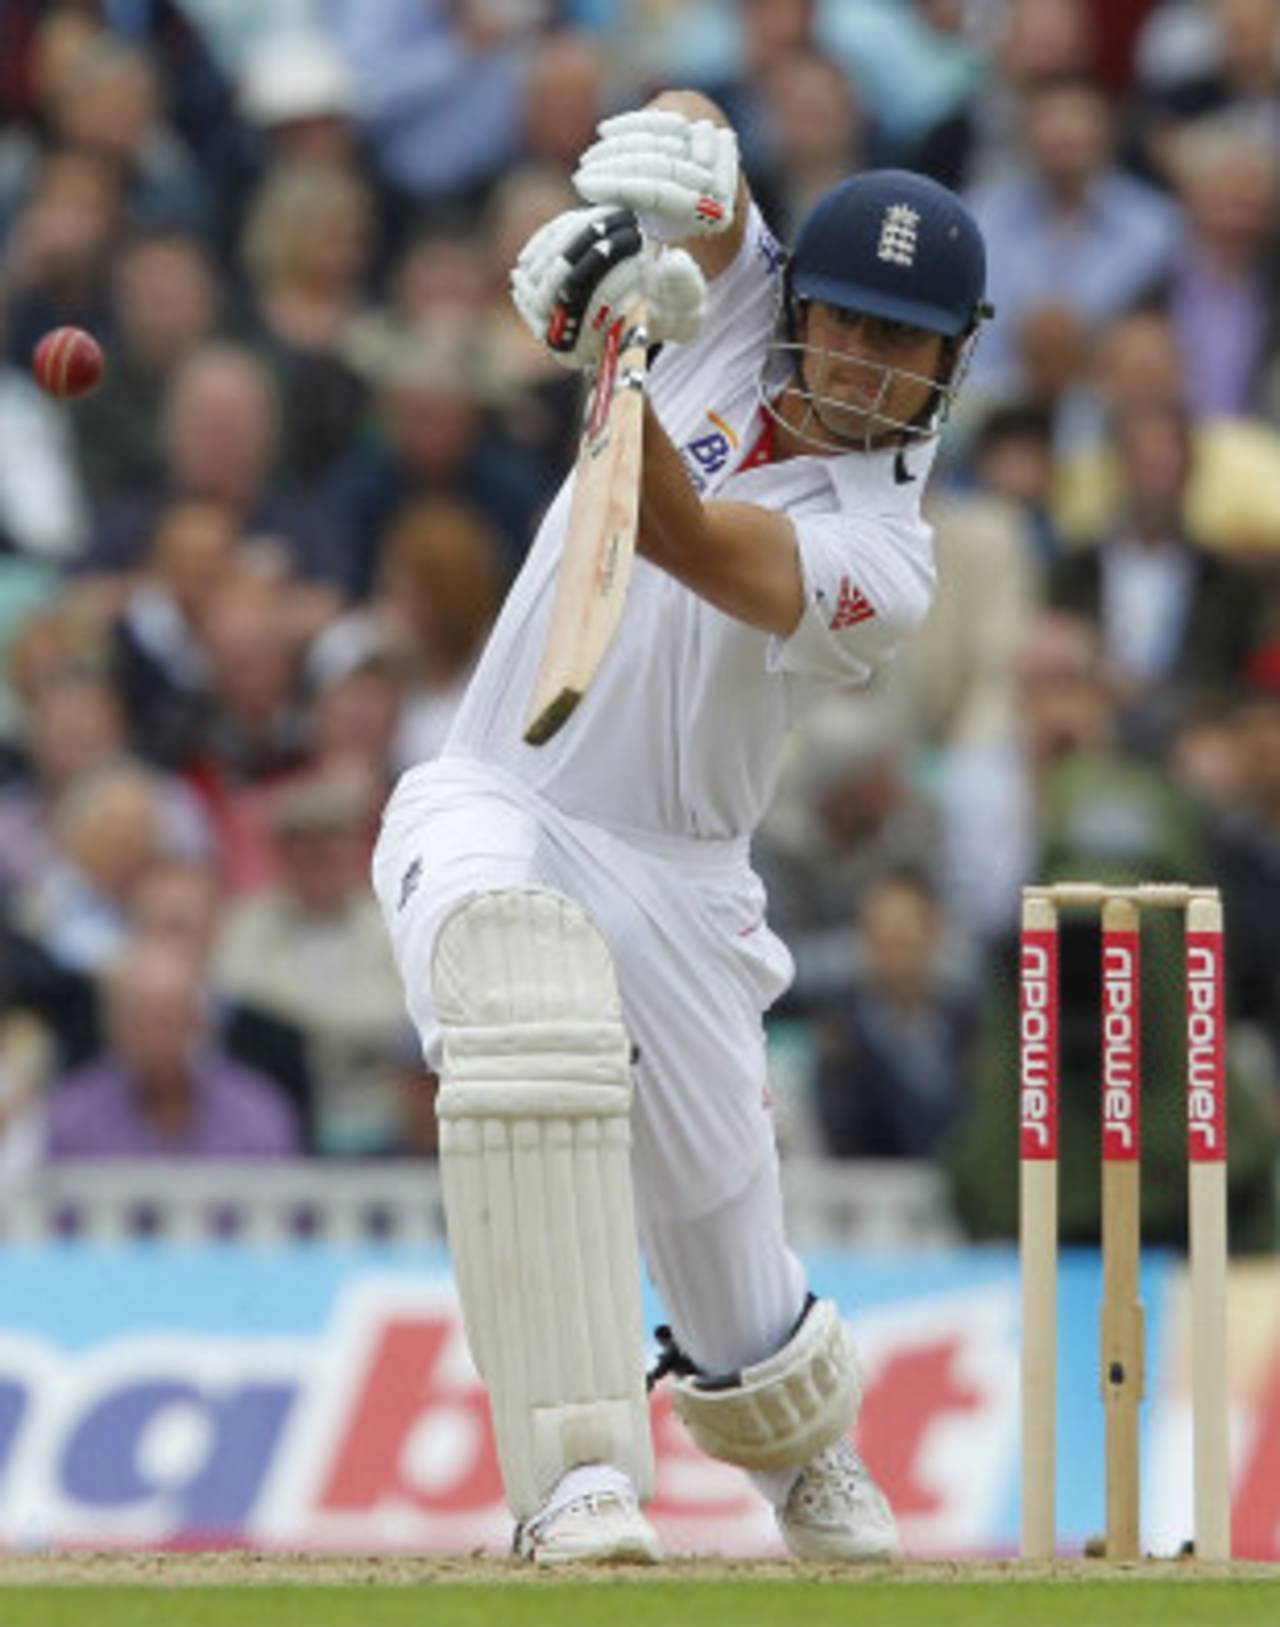 Alastair Cook strokes one down the ground, England v India, 4th Test, The Oval, 1st day, August 18, 2011